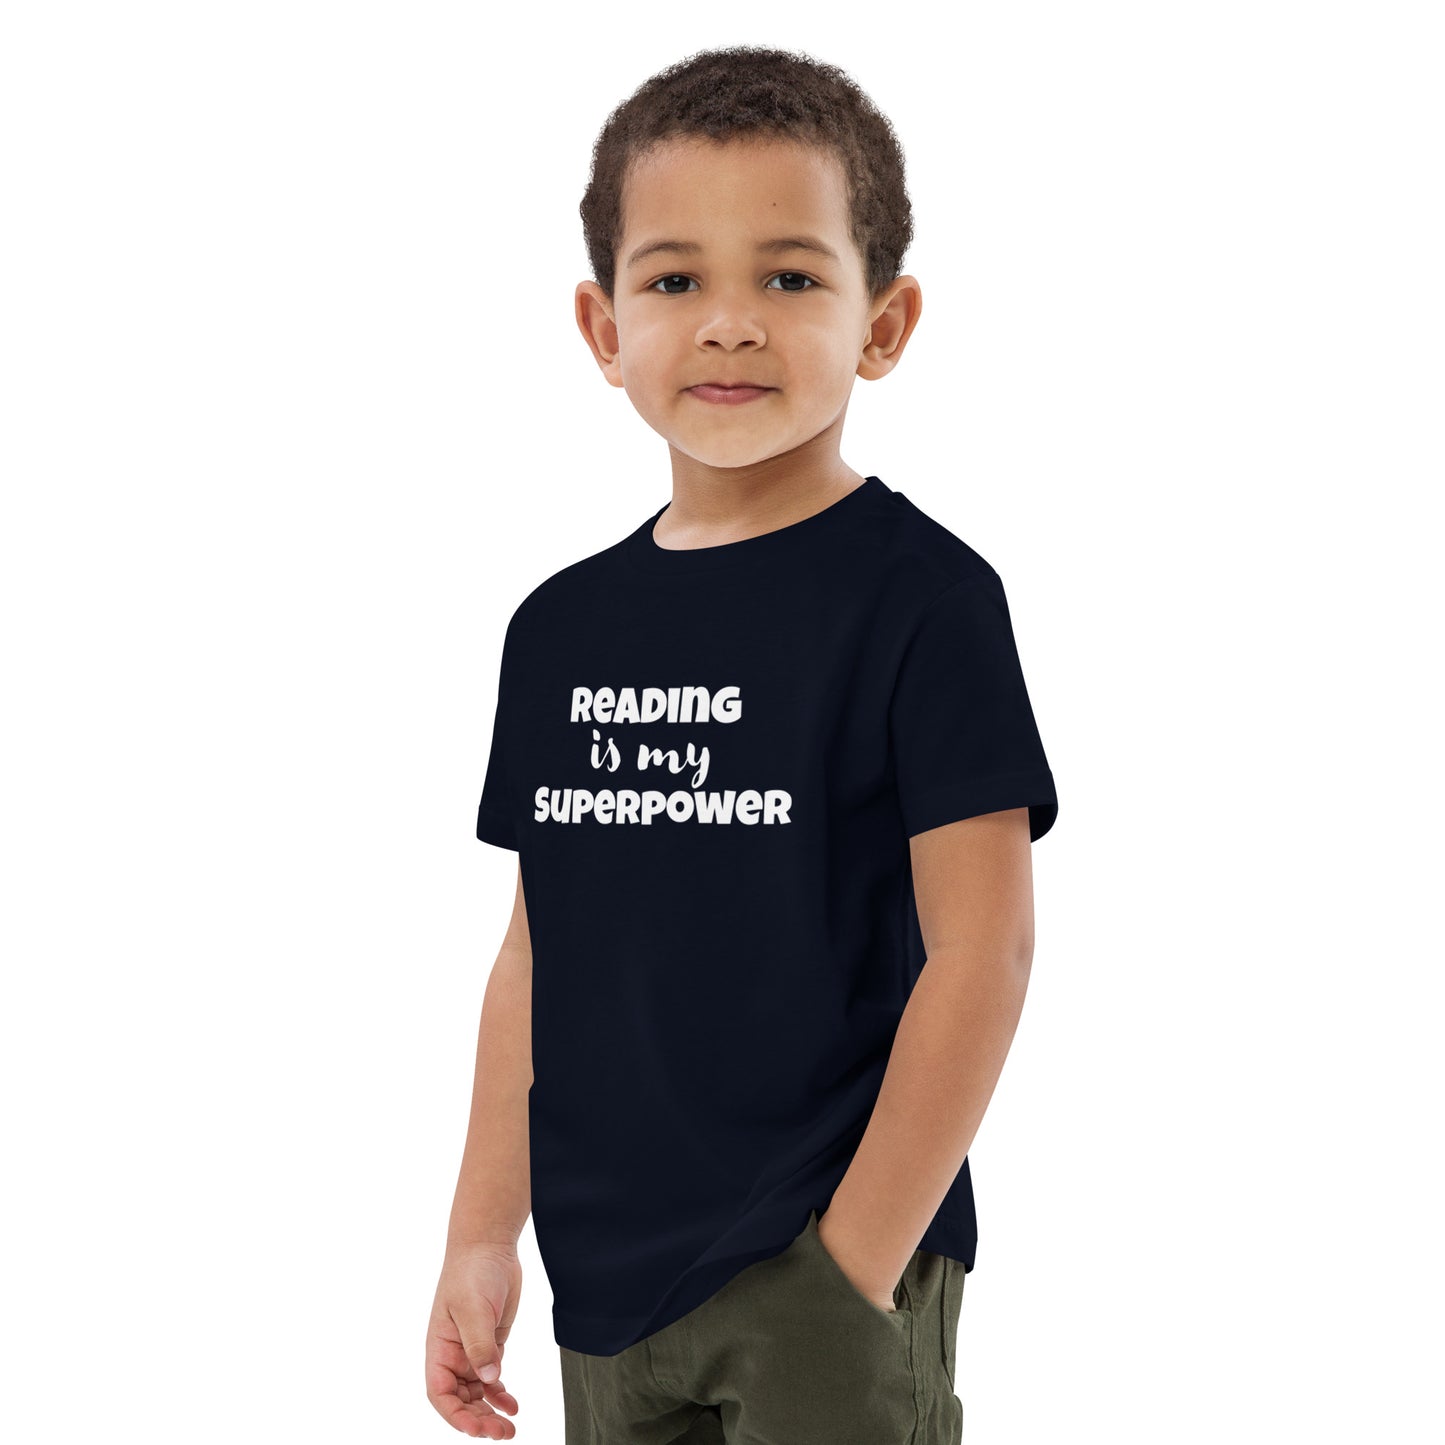 Reading is my Superpower Organic cotton kids Reading t-shirt